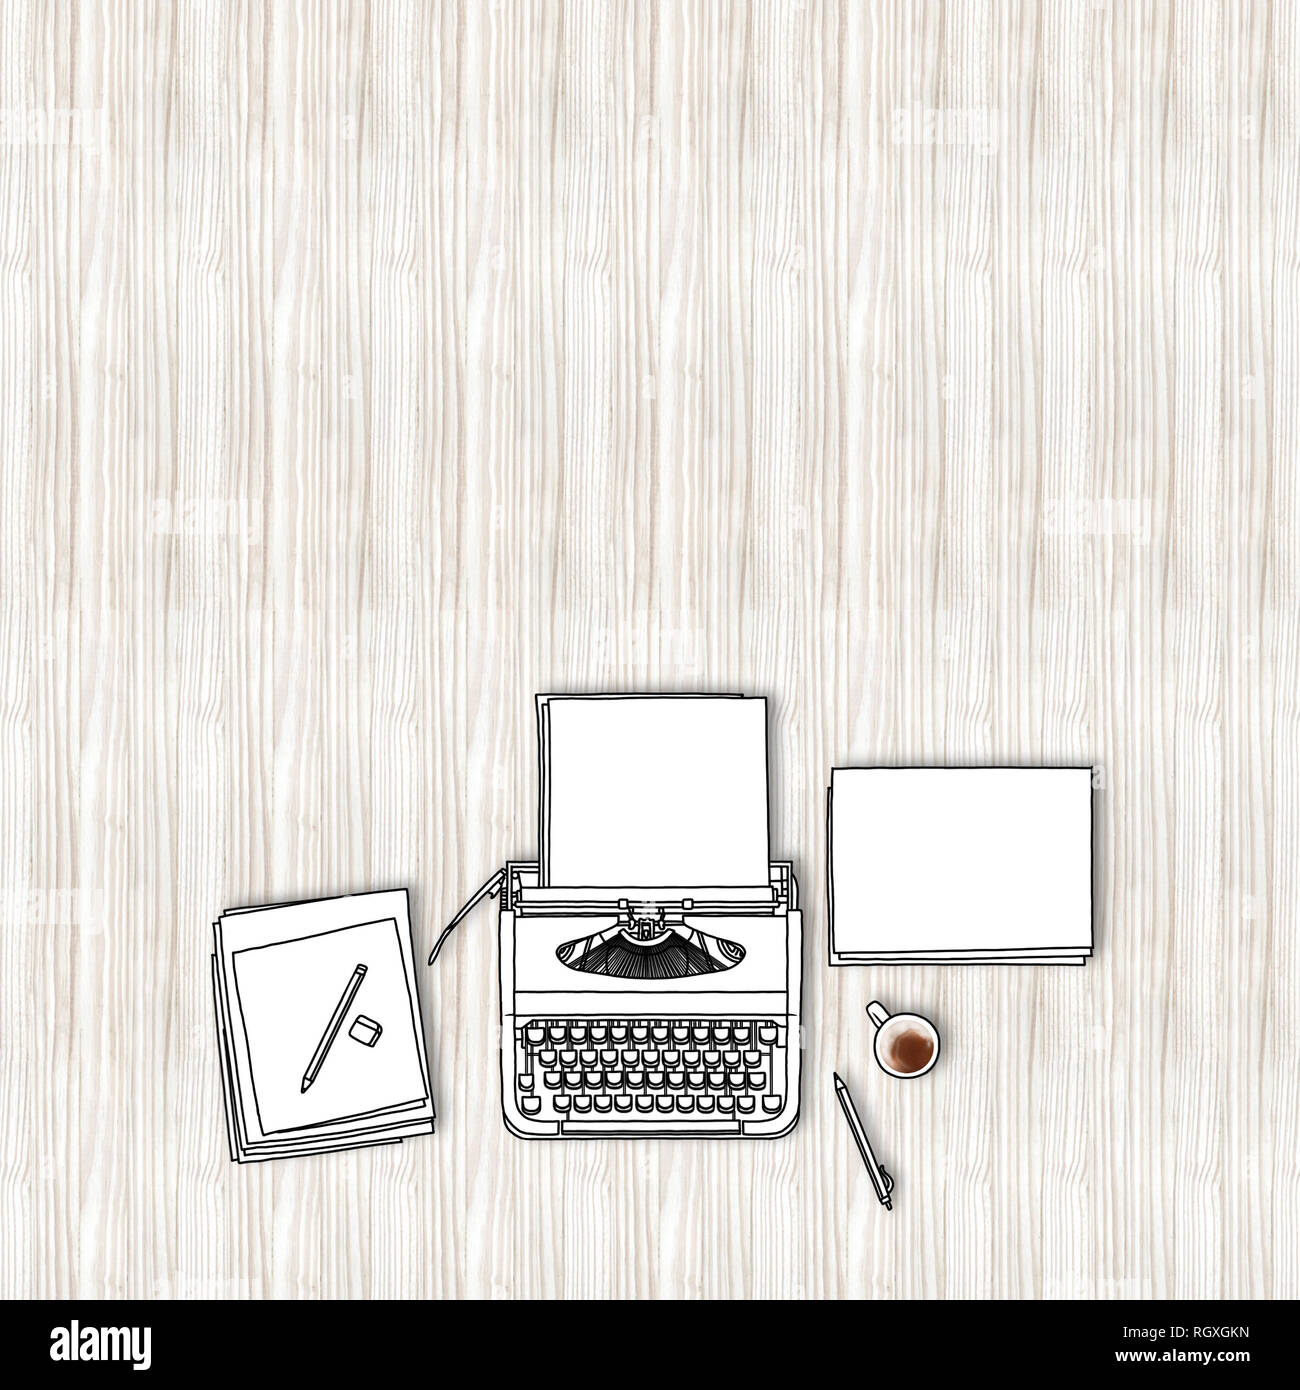 Sketch illustration drawing of old typewriter and blank paper frames on wooden desktop Stock Photo